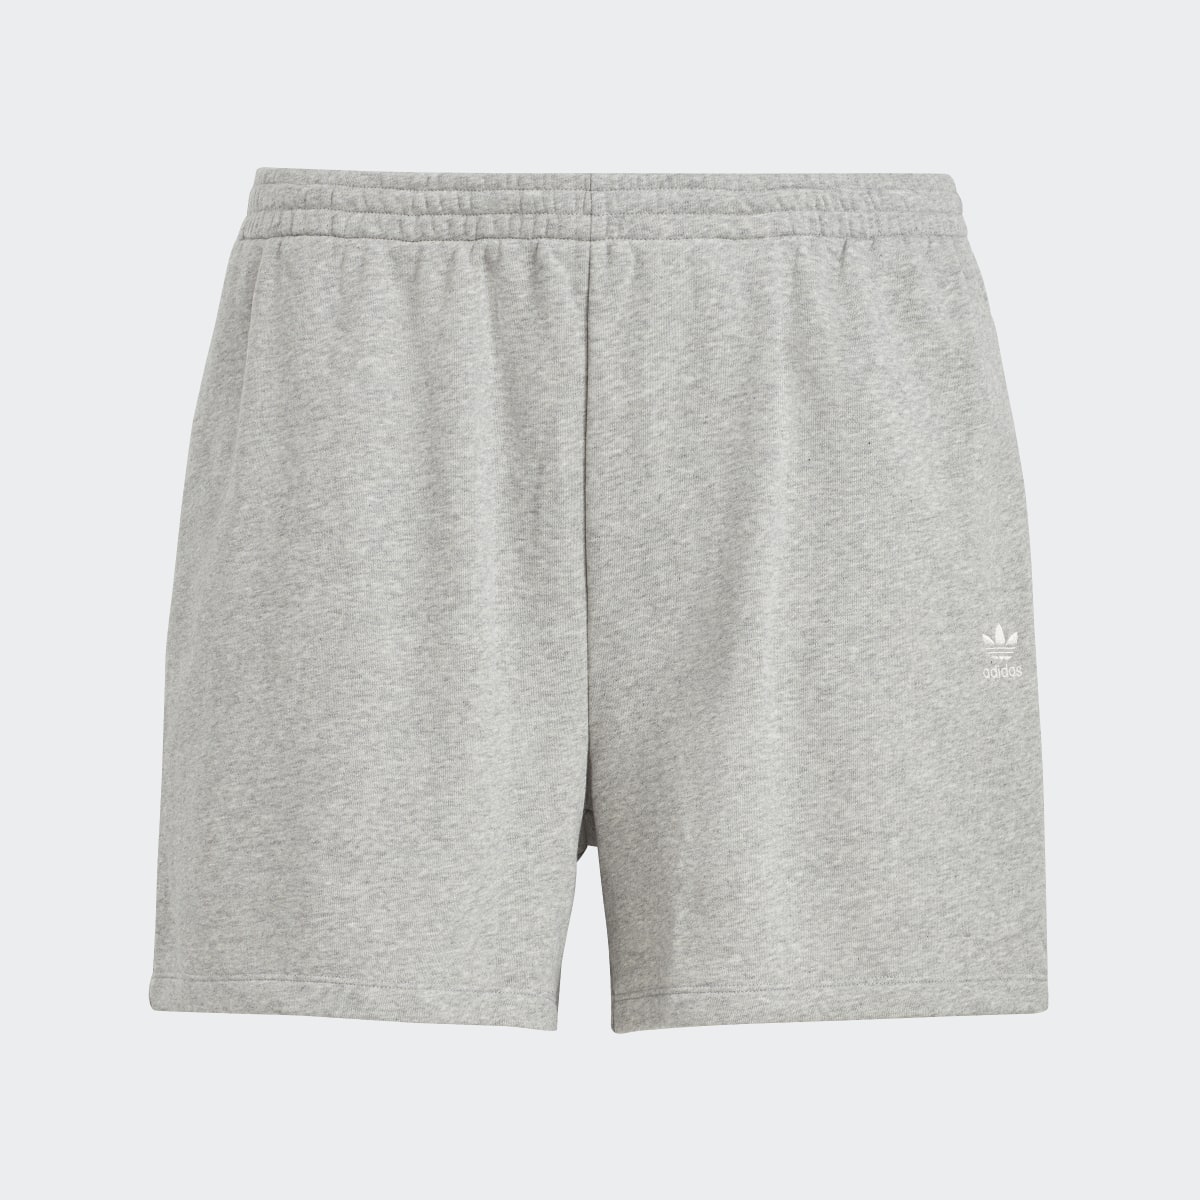 Adidas Adicolor Essentials French Terry Shorts (Plus Size). 4